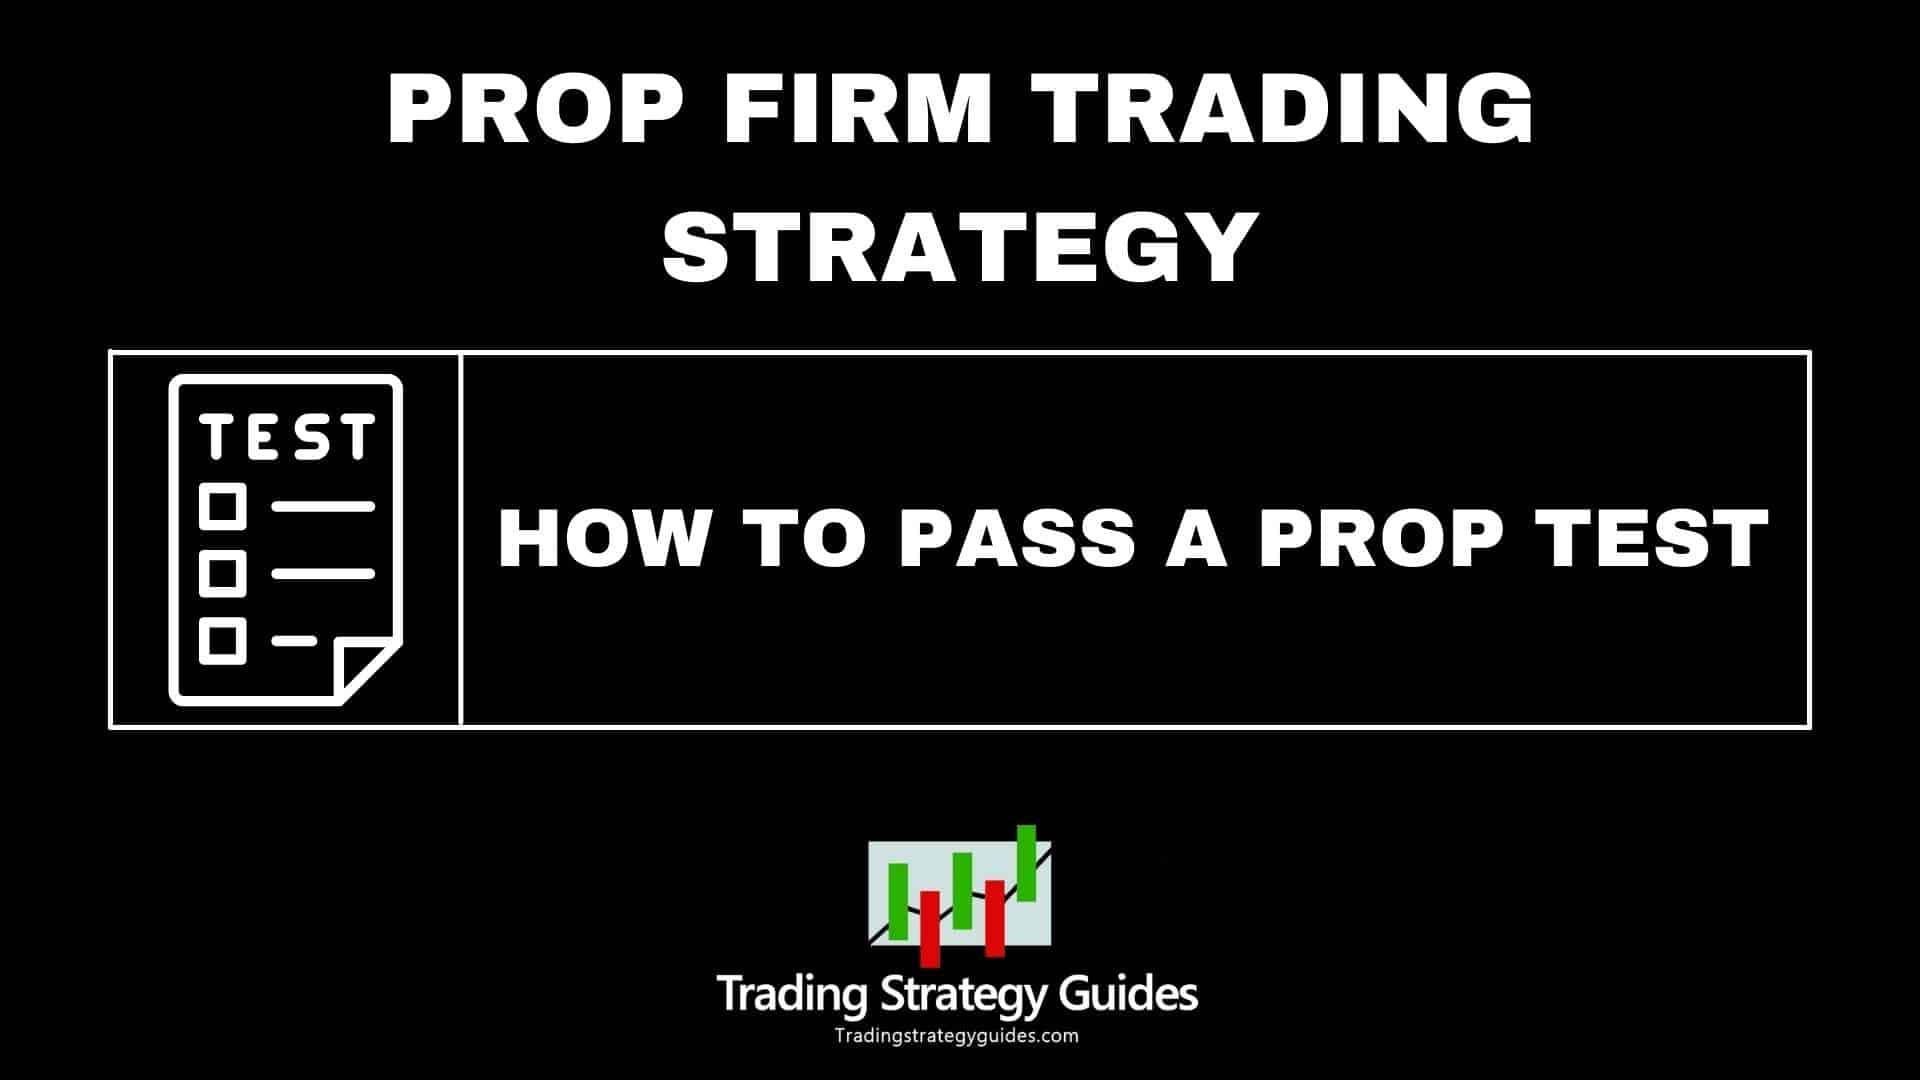 Prop Firm Trading Strategy - How To Pass A Prop Firm Challenge